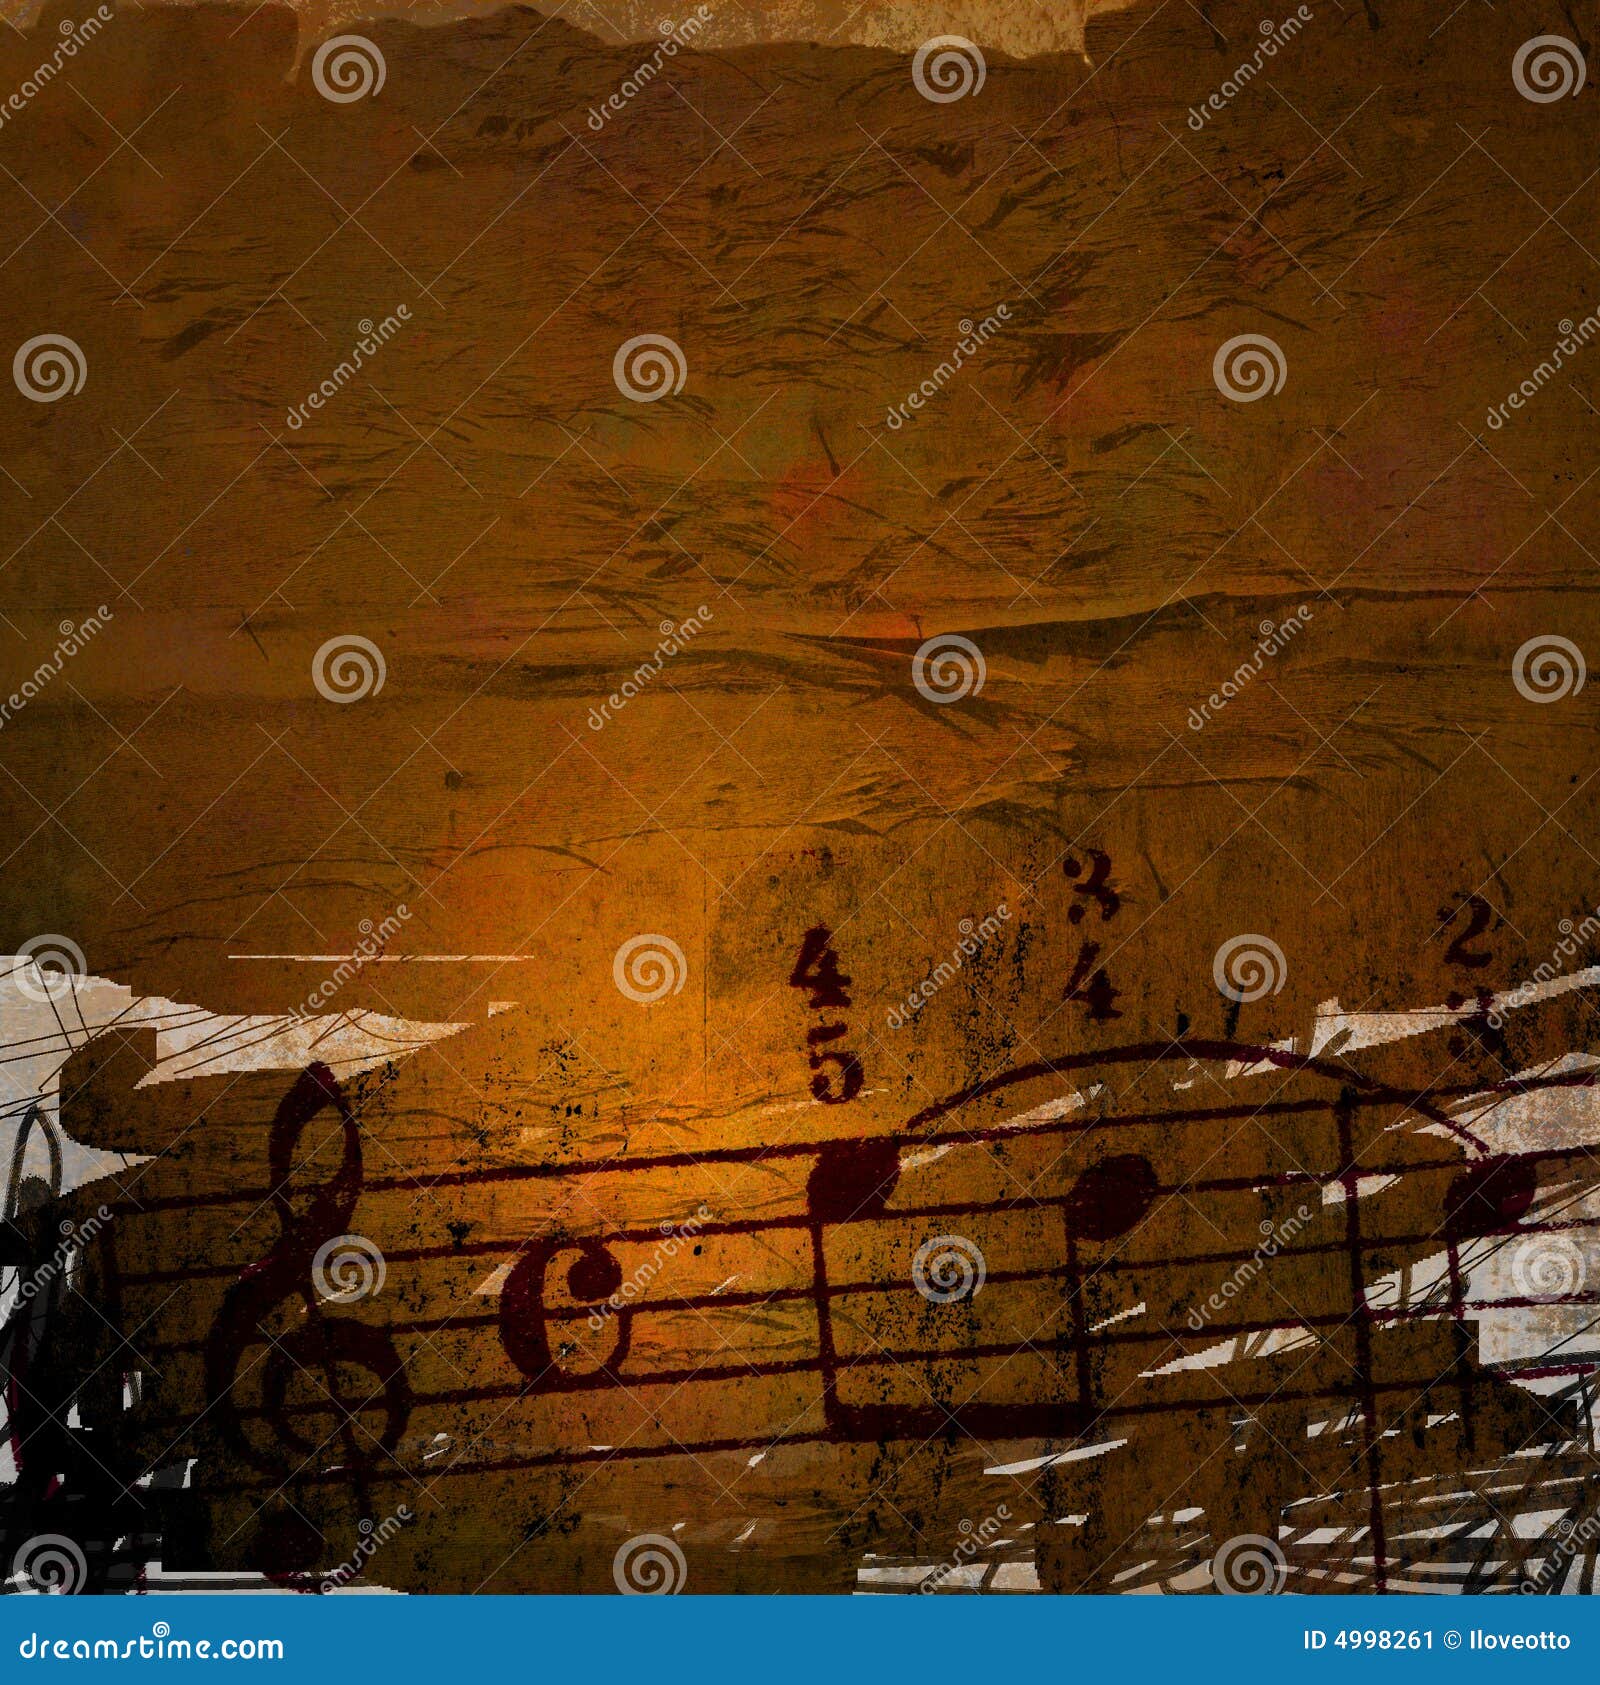 grunge melody textures and backgrounds